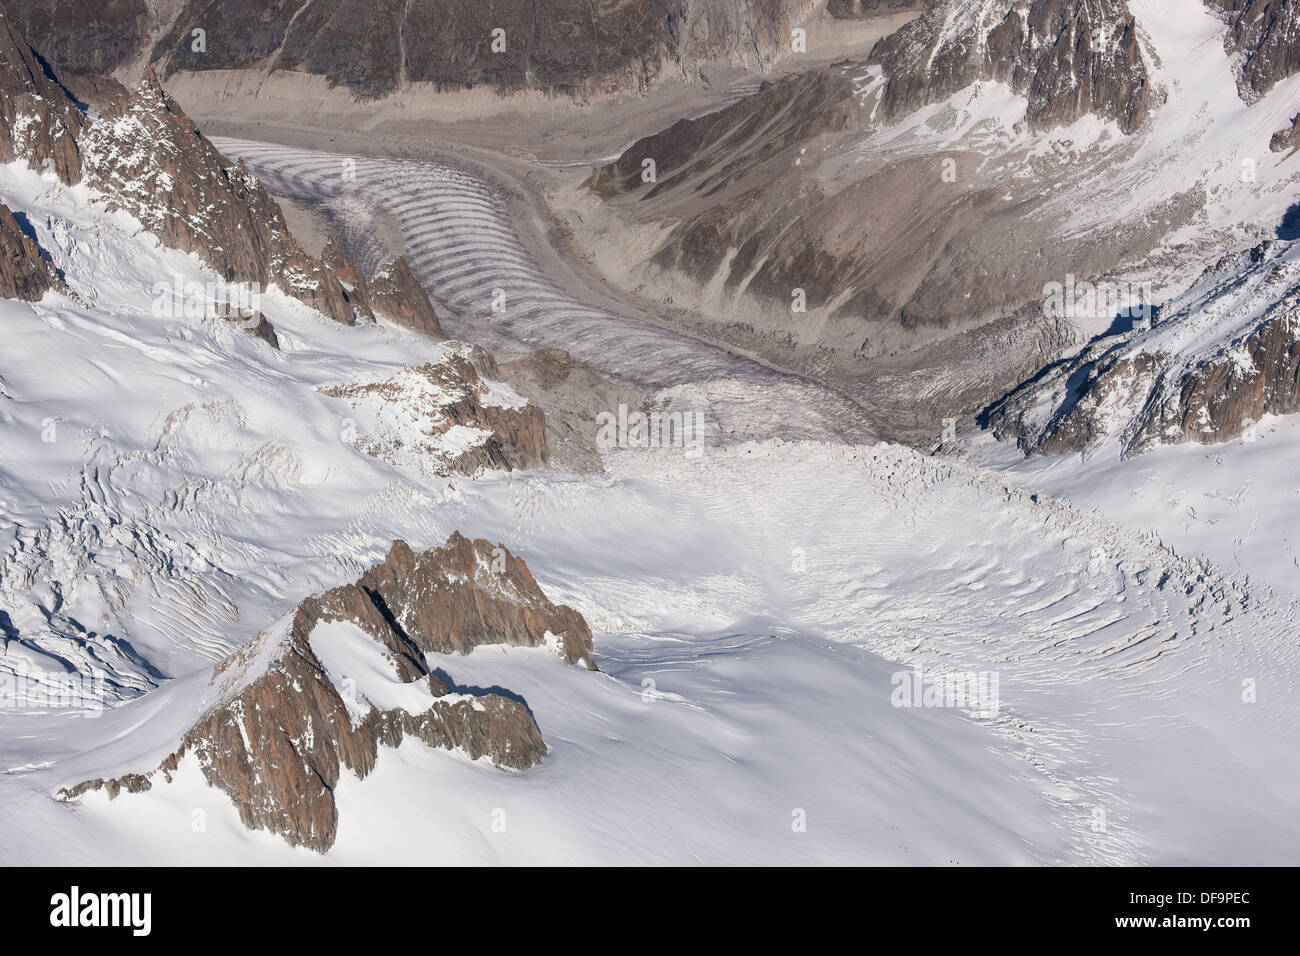 AERIAL VIEW. Tacul and Mer de Glace glaciers. Forbes bands (ogives) visible on the Mer de Glace glacier. Chamonix Mont-Blanc, Haute-Savoie, France. Stock Photo